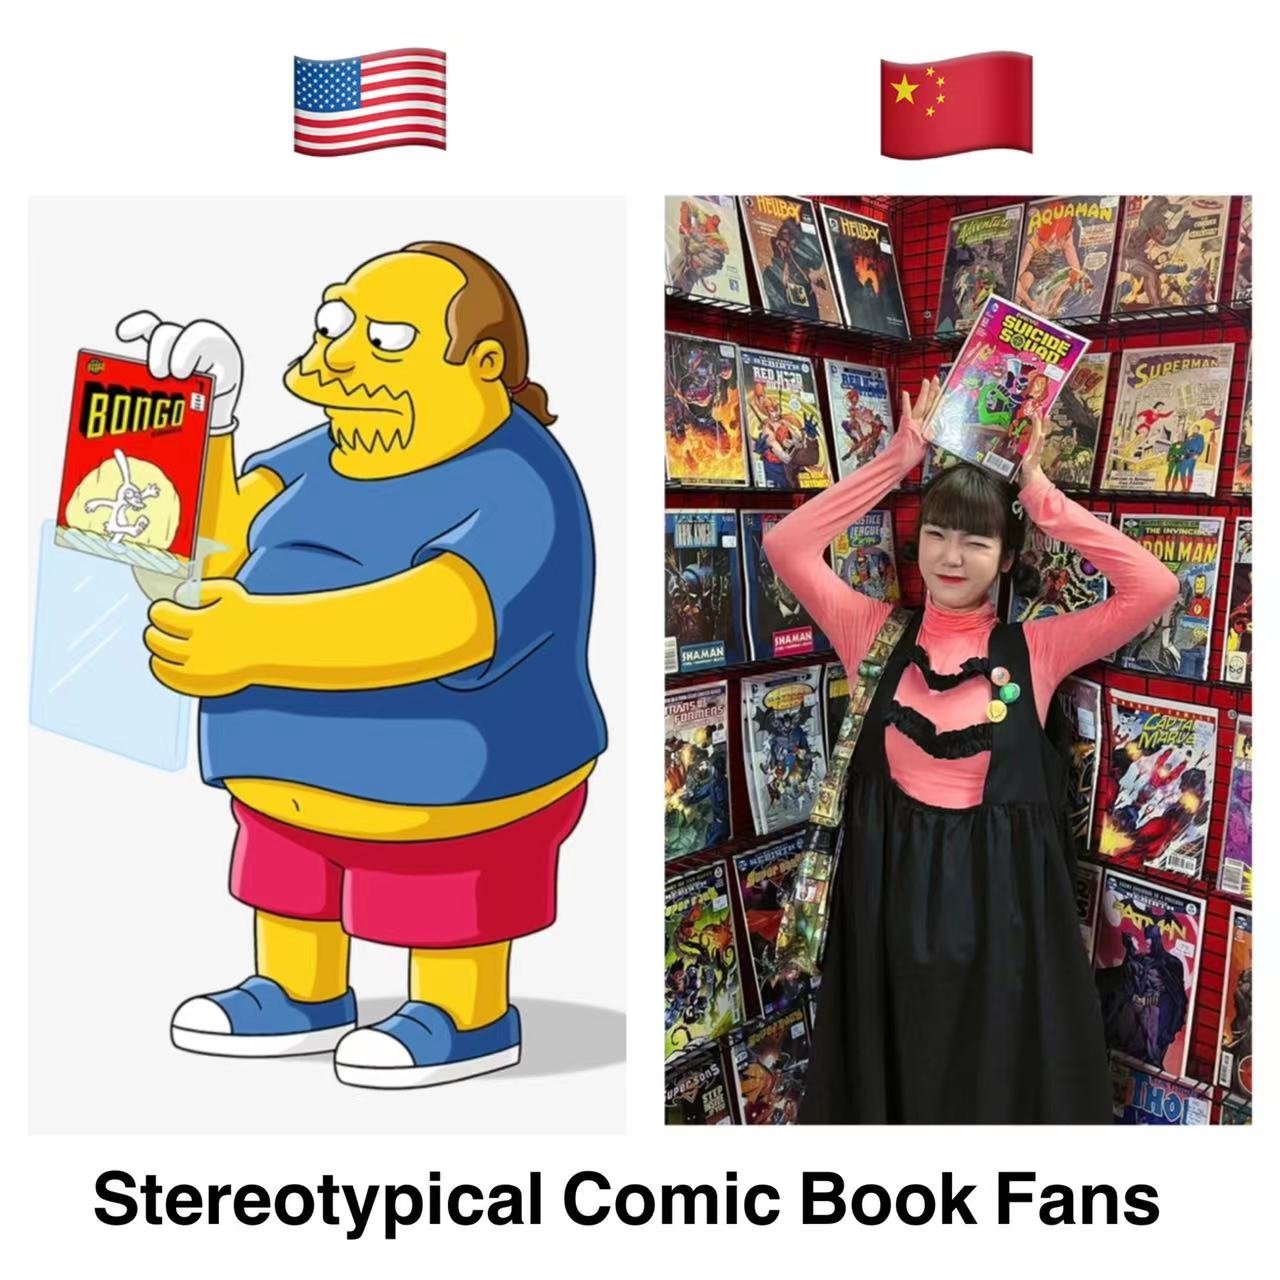 Ashley Huang: The average Chinese comic store customer is an entirely different demographic to their American counterparts.